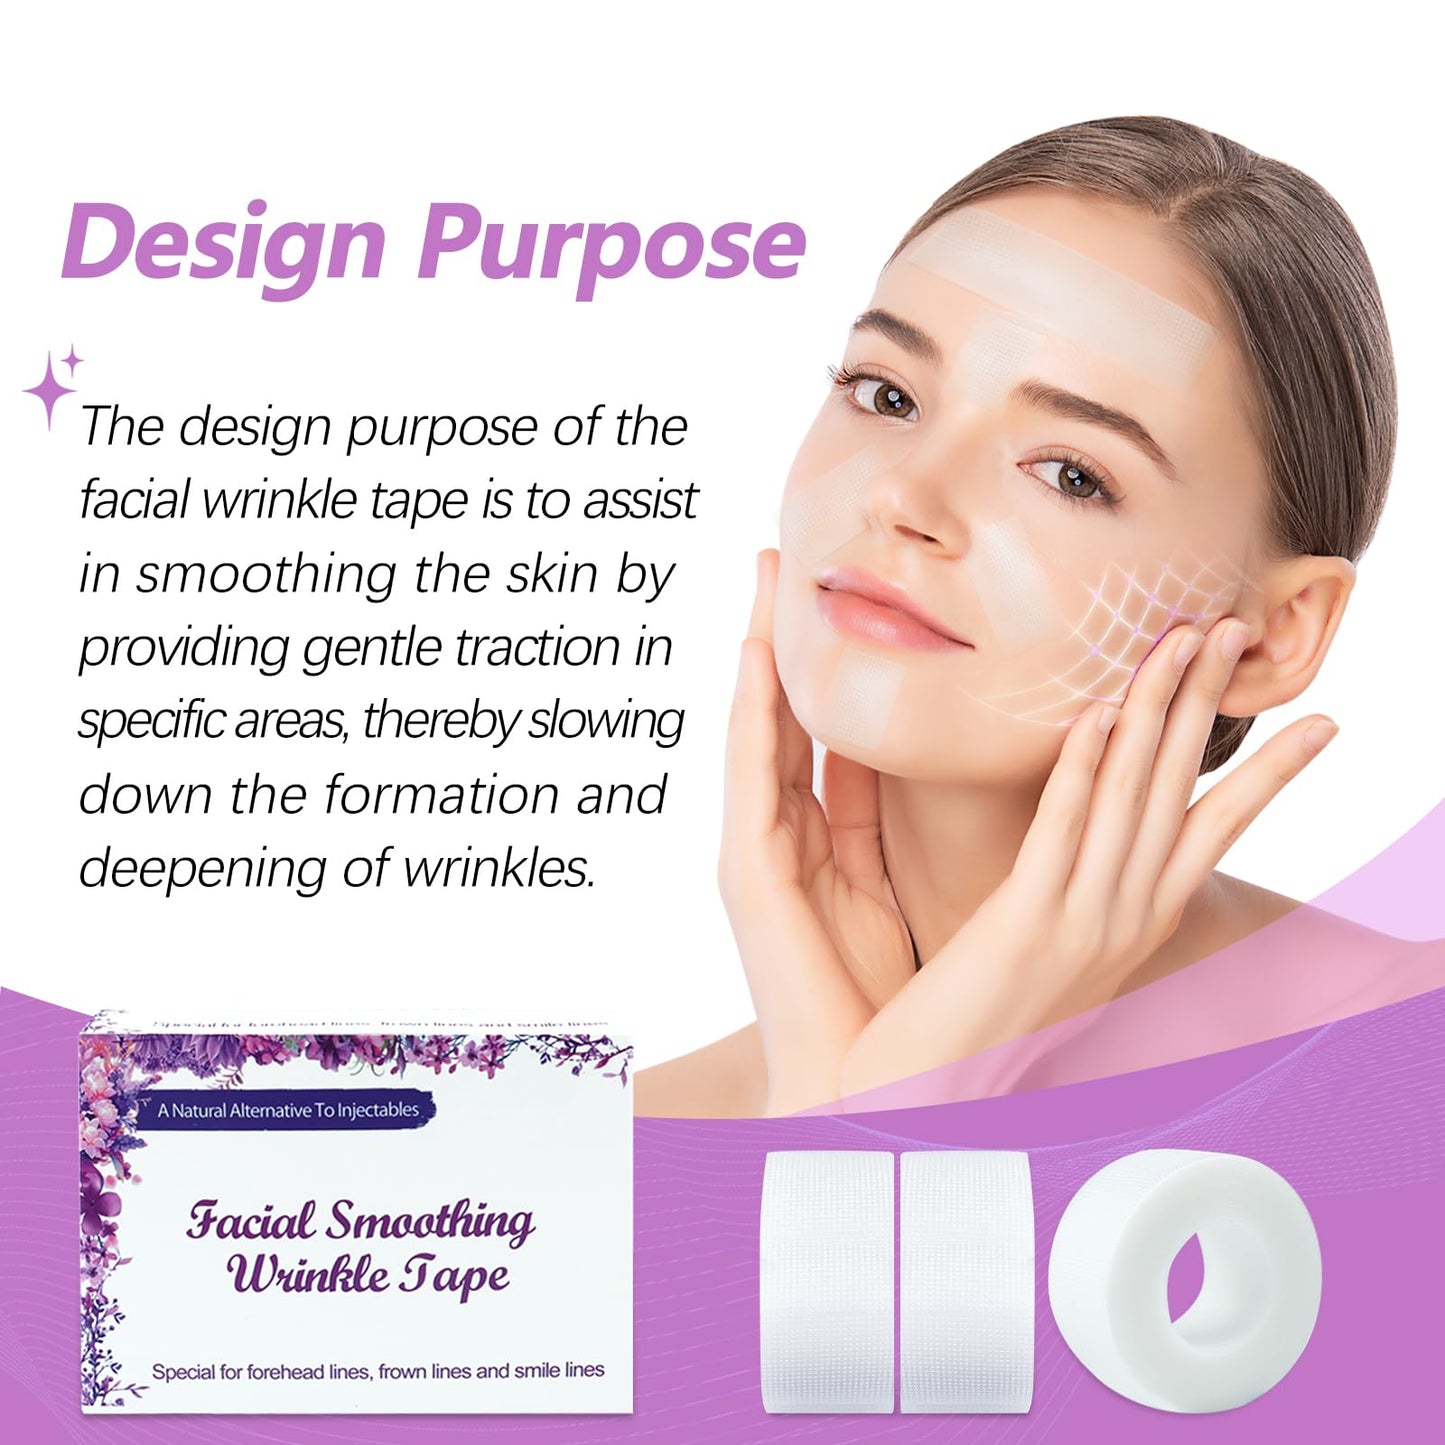 Face Tape Face Wrinkle Smoothing Tape Invisible Facial Wrinkle Patches 3Rollx10yards Repair Forehead Wrinkles 11's,Crow's Feet & Fine Lines,Help Prevent New Ones Freely to Tear Easy to Use